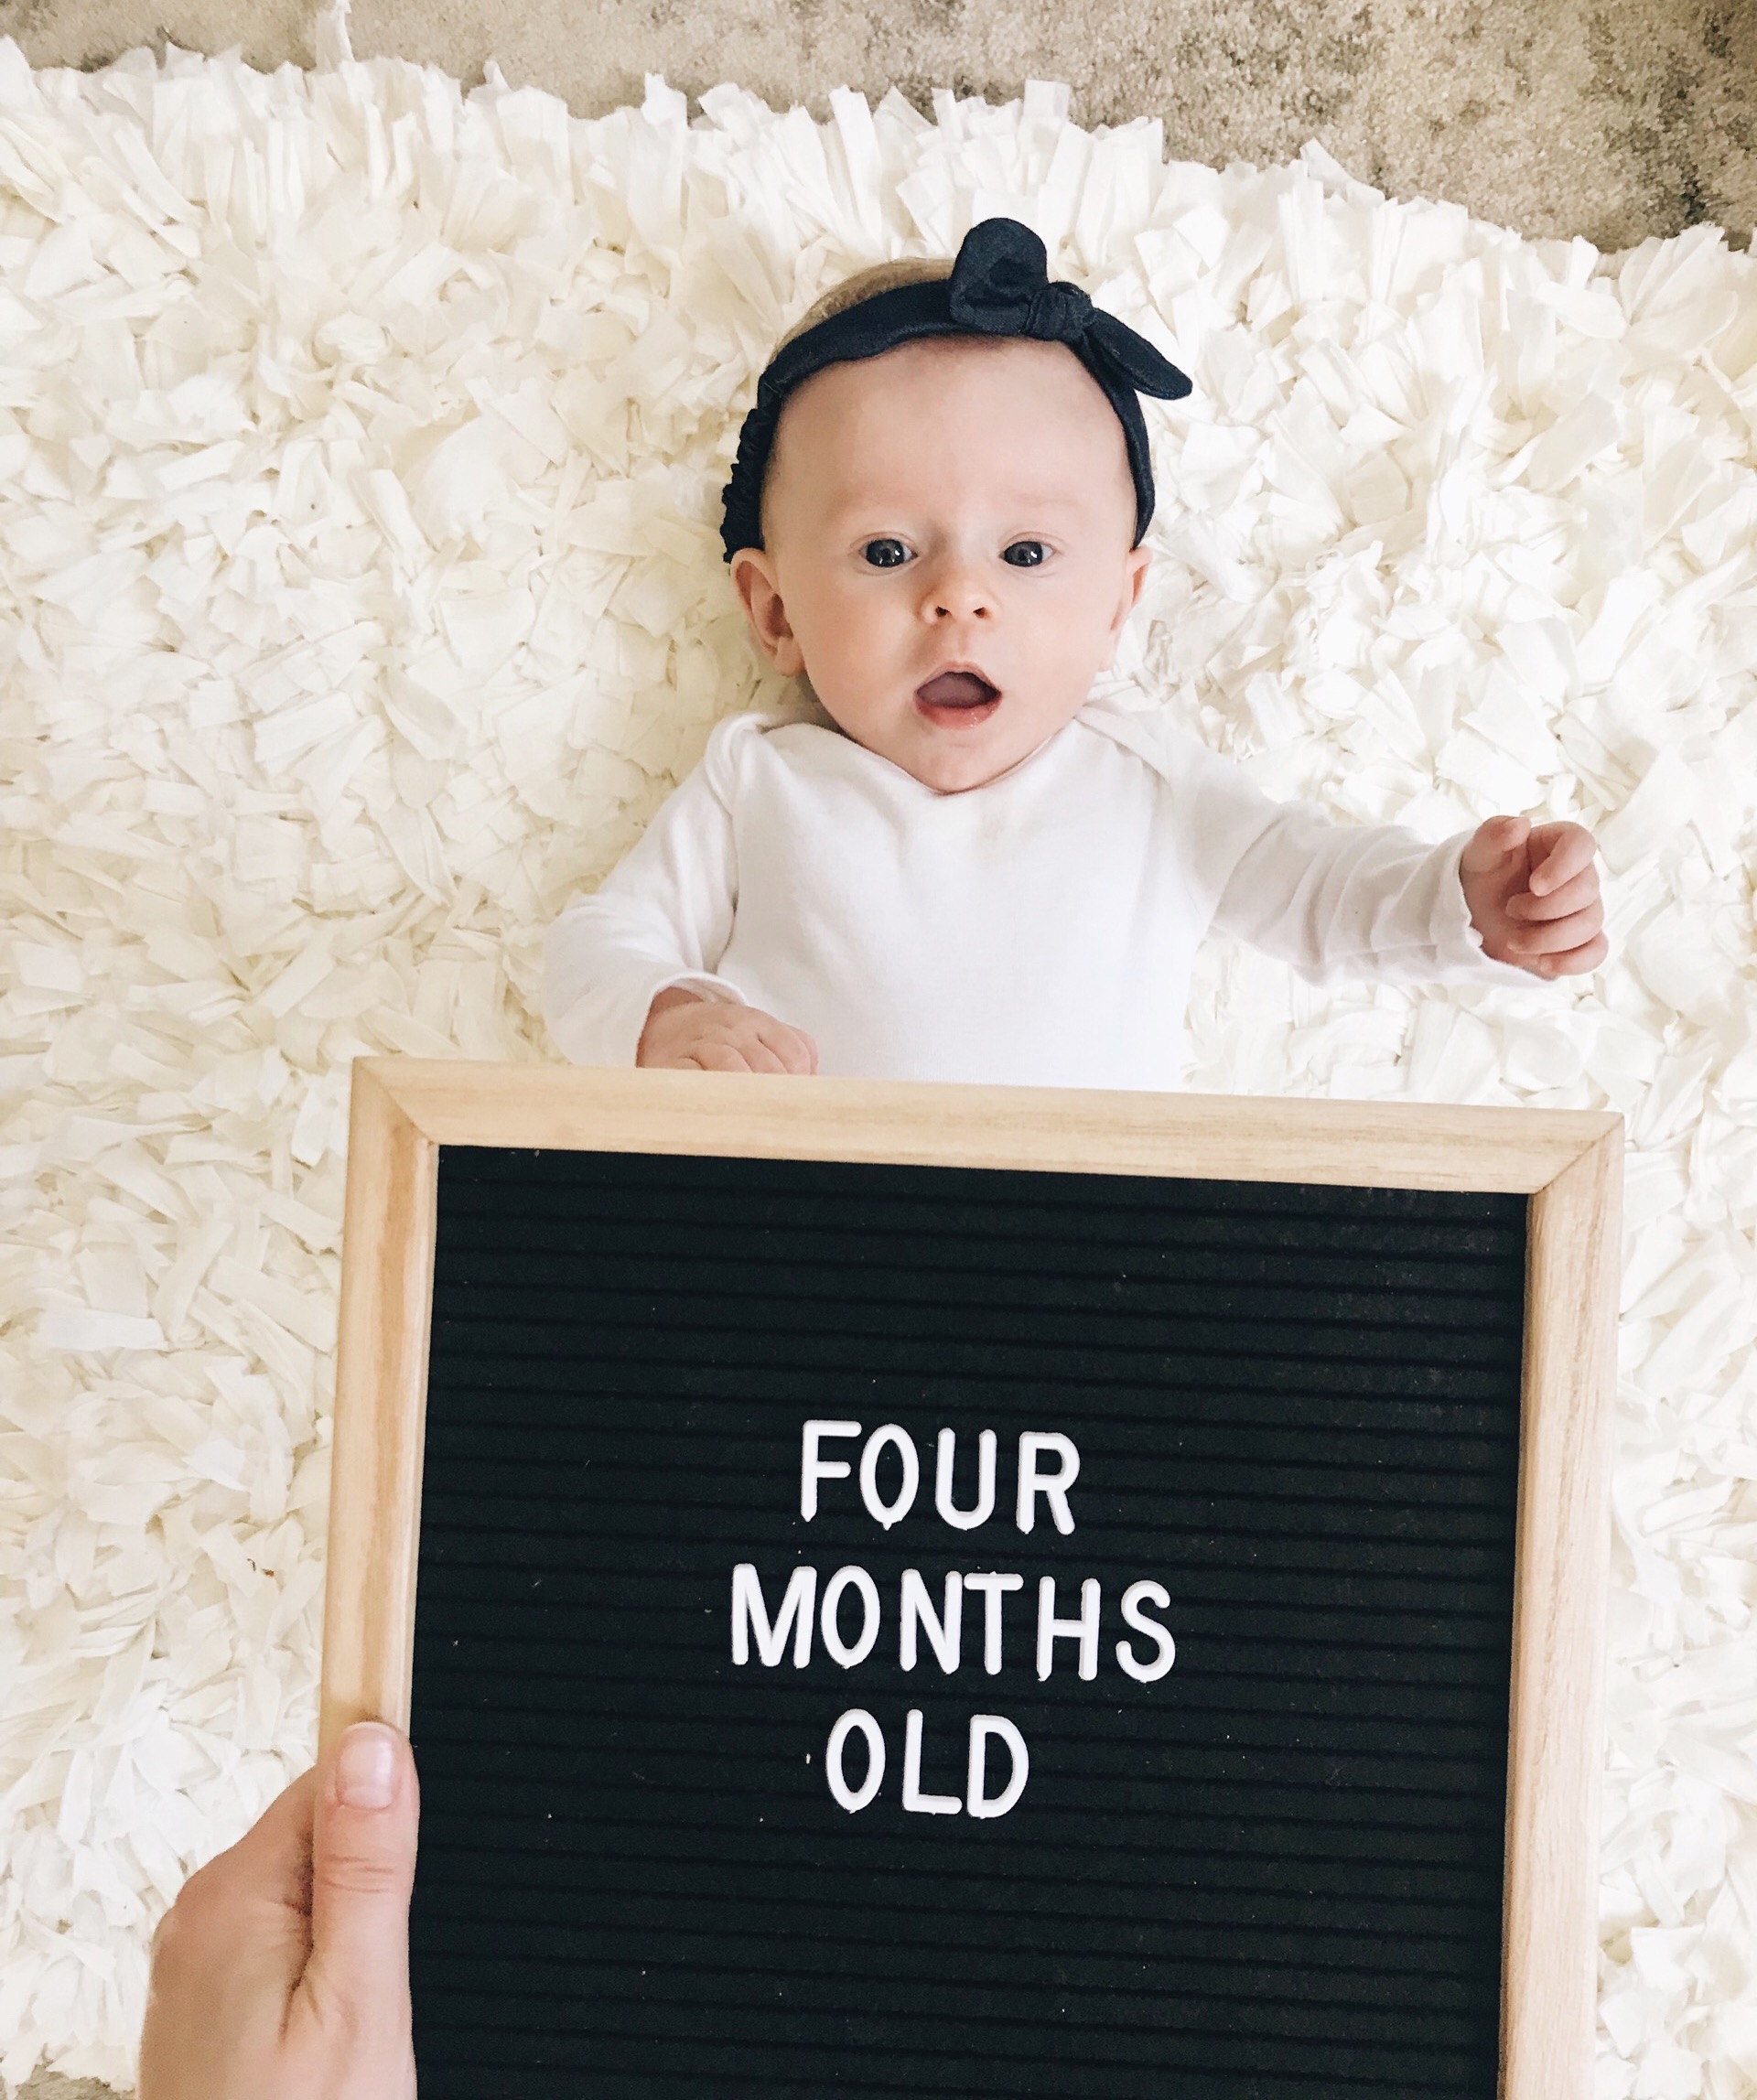 Baby Update: Sloane at Four Months